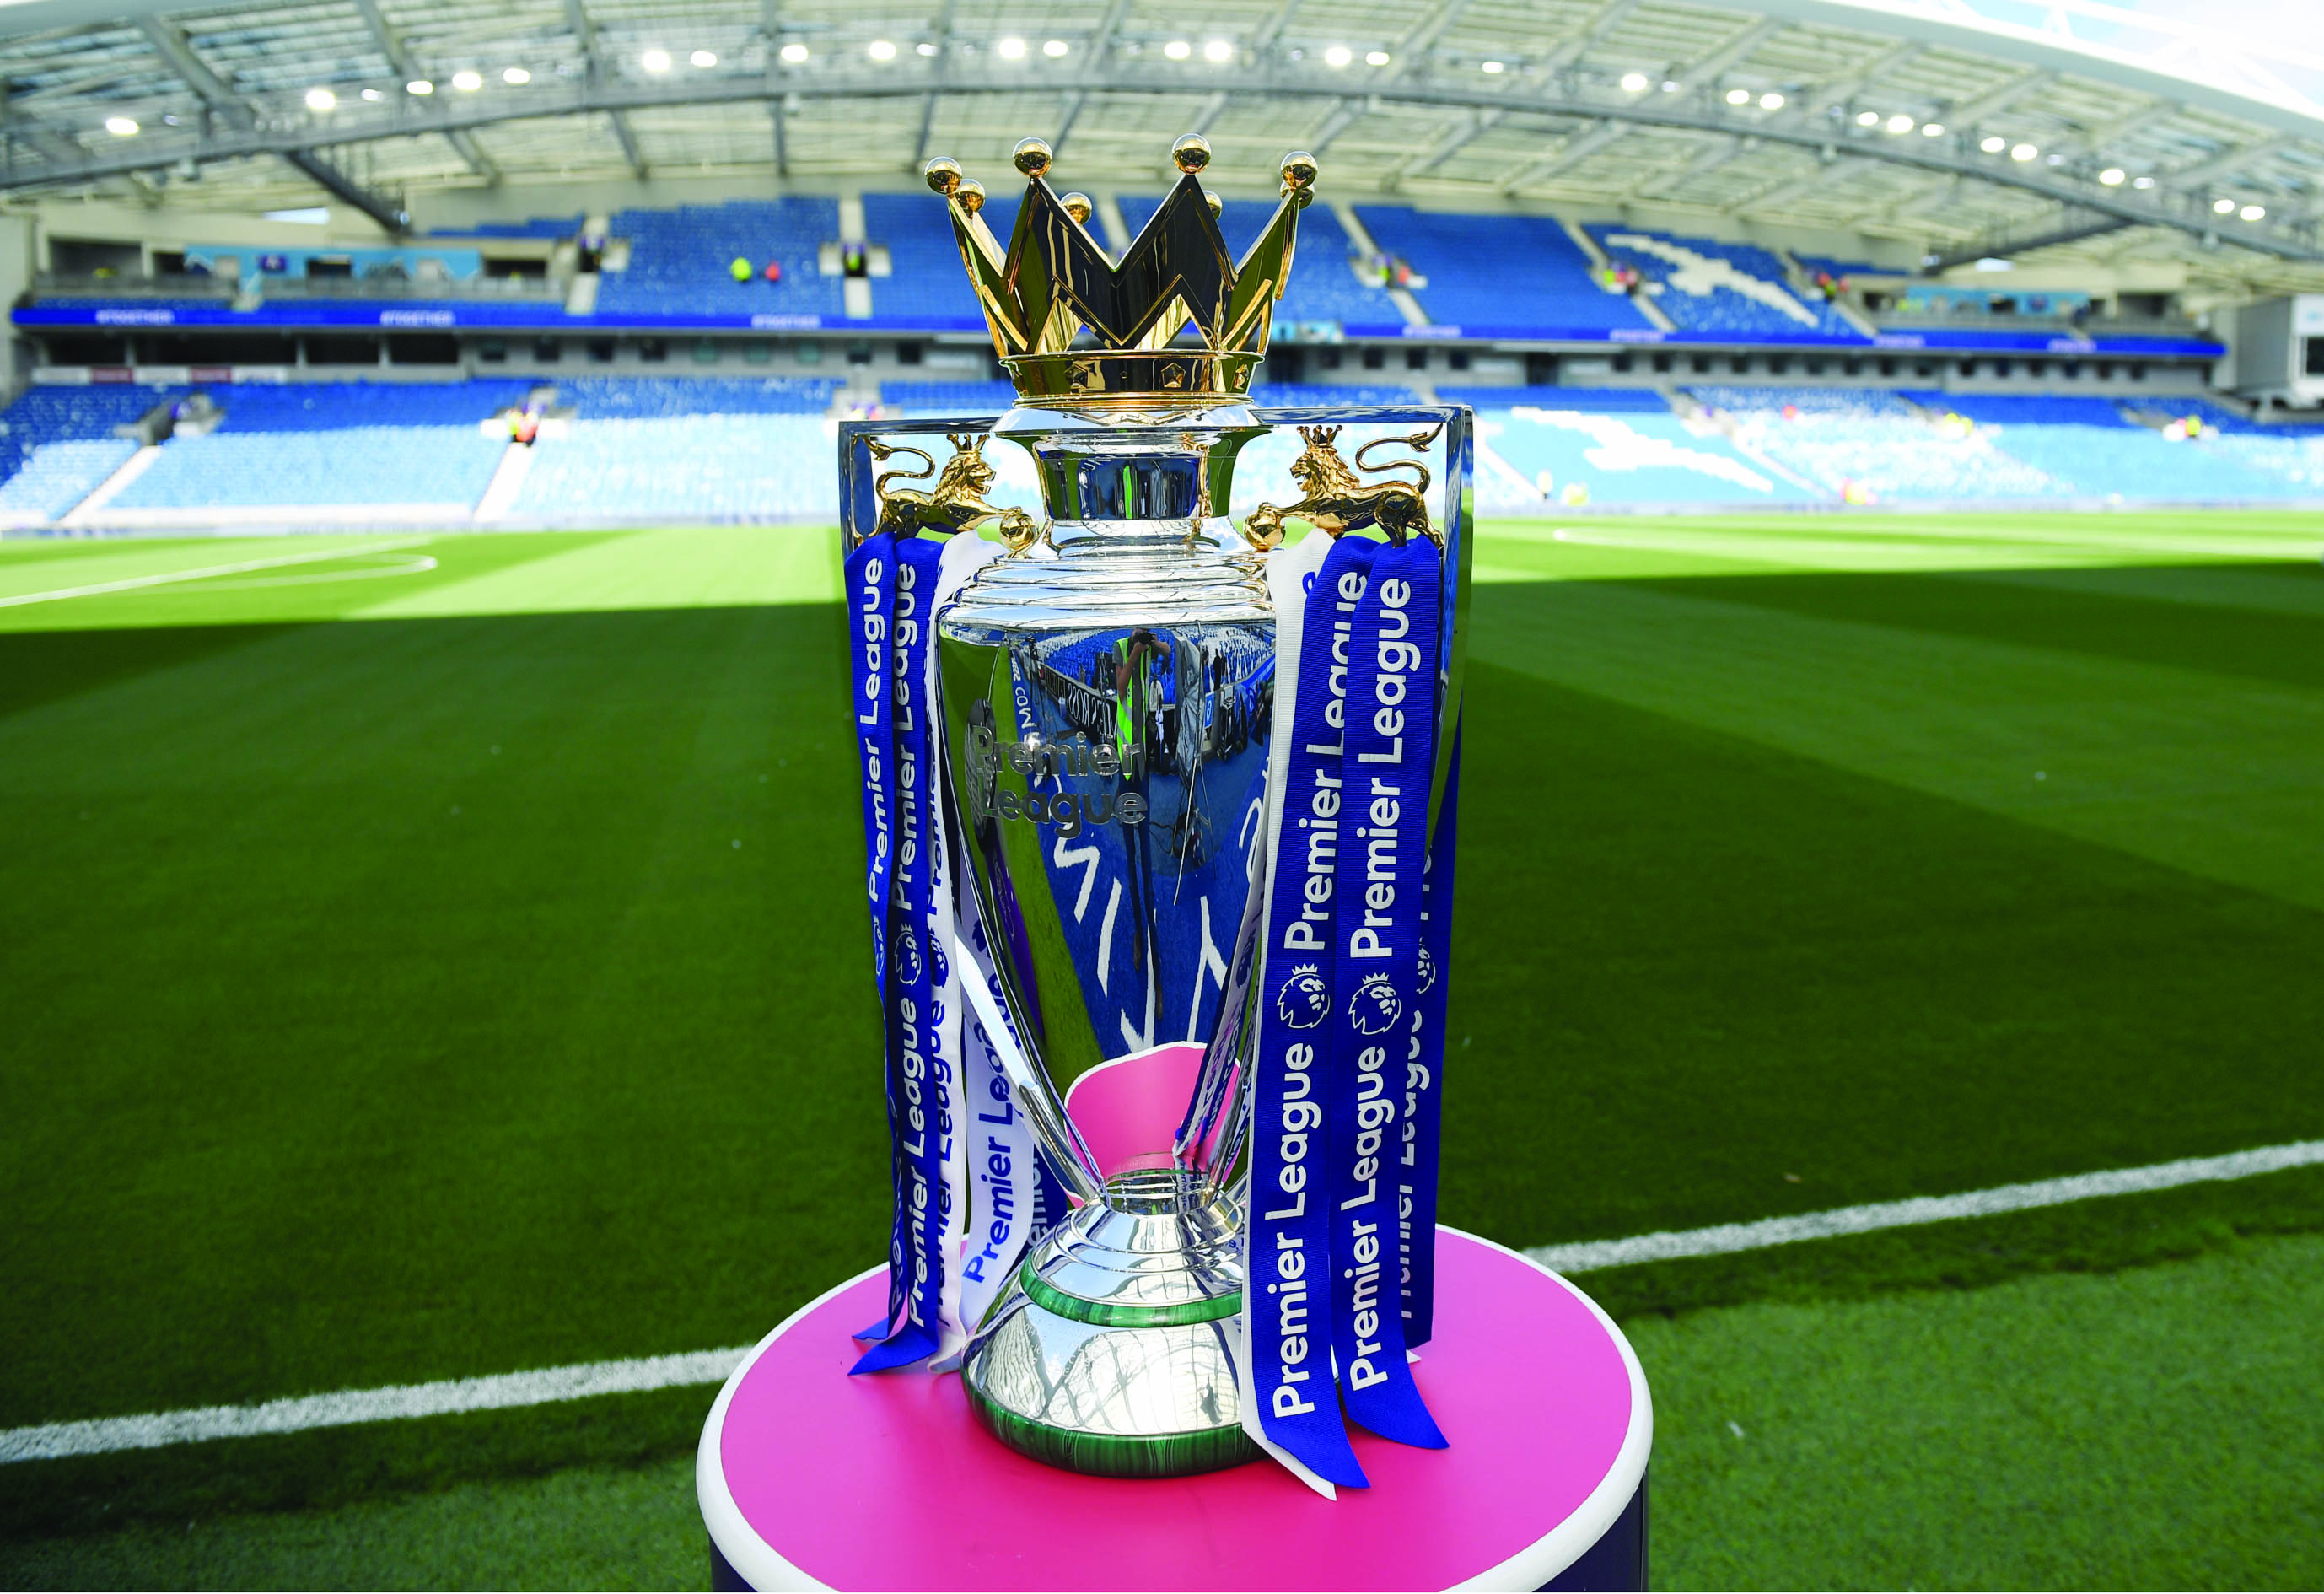 (FILES) In this file photo taken on August 12, 2017 The Premier league trophy sits beside the pitch ahead of the English Premier League football match between Brighton and Hove Albion and Manchester City at the American Express Community Stadium in Brighton. - Premier League clubs will ask players to take a combination of pay cuts and deferrals amounting to 30 percent of their salary due to the financial crisis caused by coronavirus, the league said in a statement on April 3, 2020. (Photo by CHRIS J RATCLIFFE / AFP) / RESTRICTED TO EDITORIAL USE. No use with unauthorized audio, video, data, fixture lists, club/league logos or 'live' services. Online in-match use limited to 75 images, no video emulation. No use in betting, games or single club/league/player publications. /